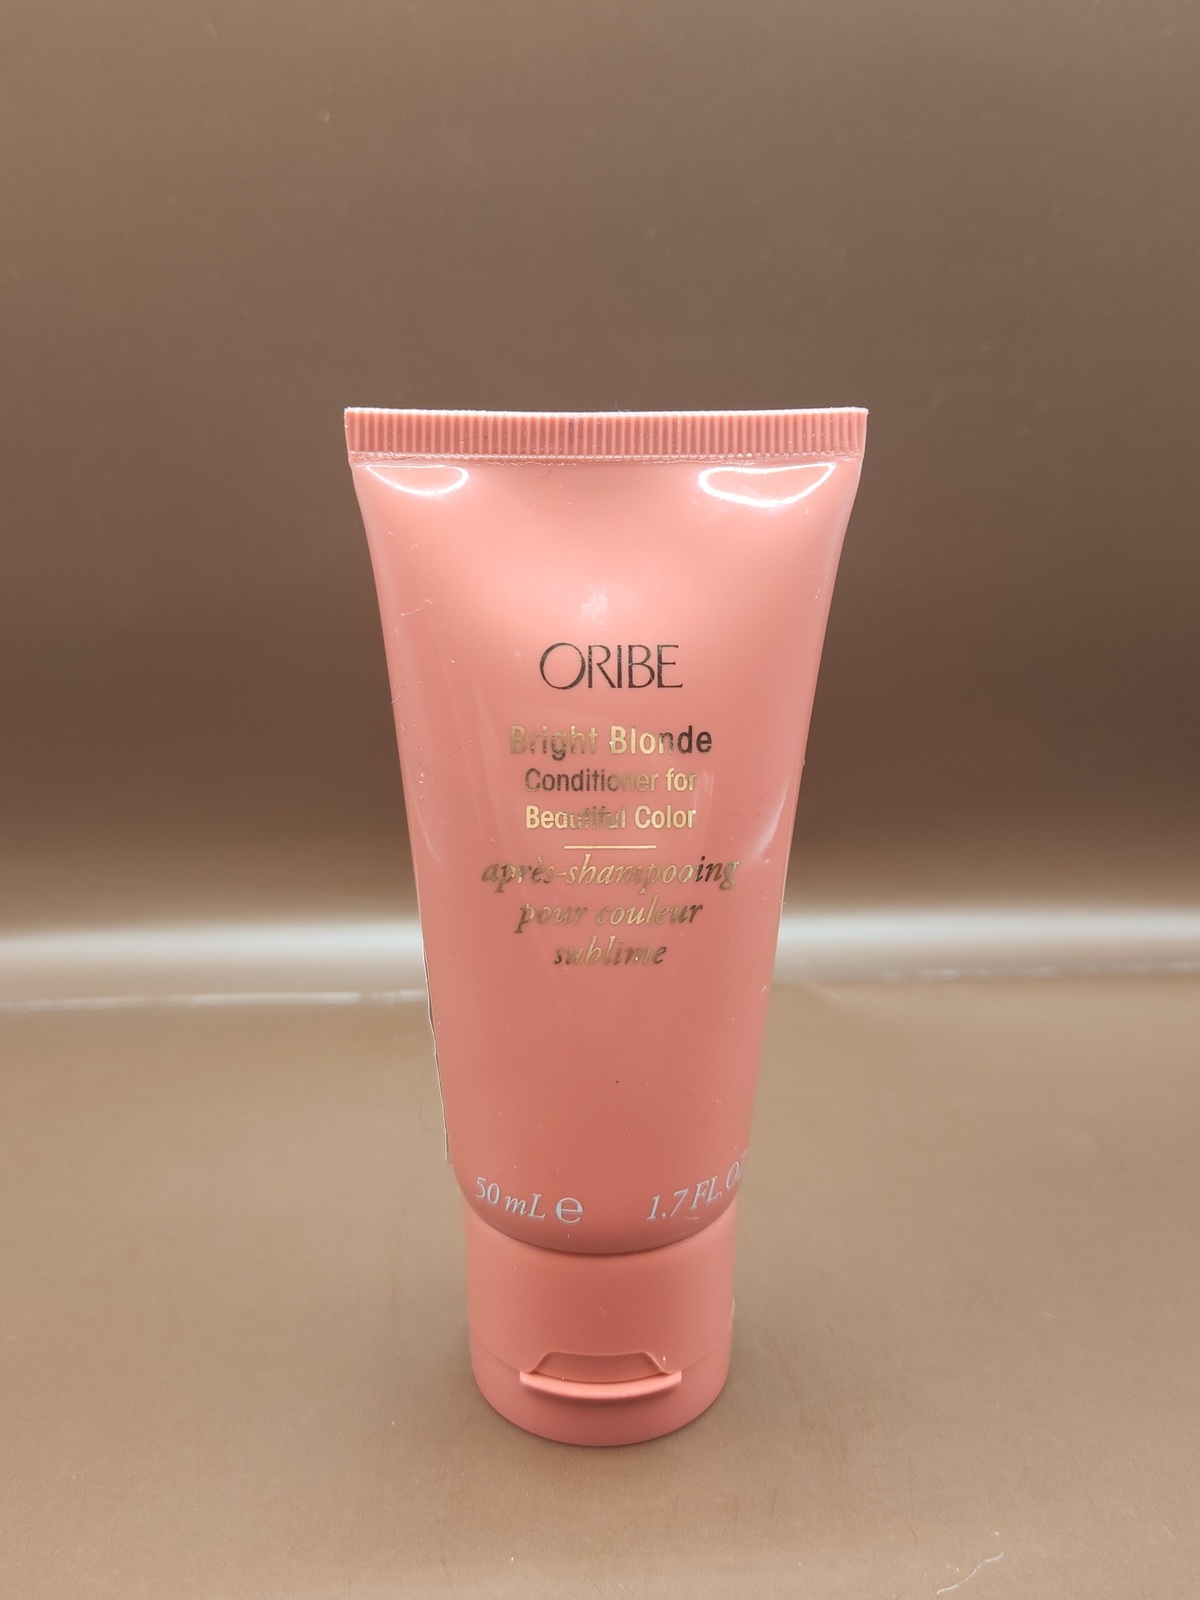 Oribe Bright Blonde Conditioner For BeautifulColor, 50ml (Sealed) - $19.00